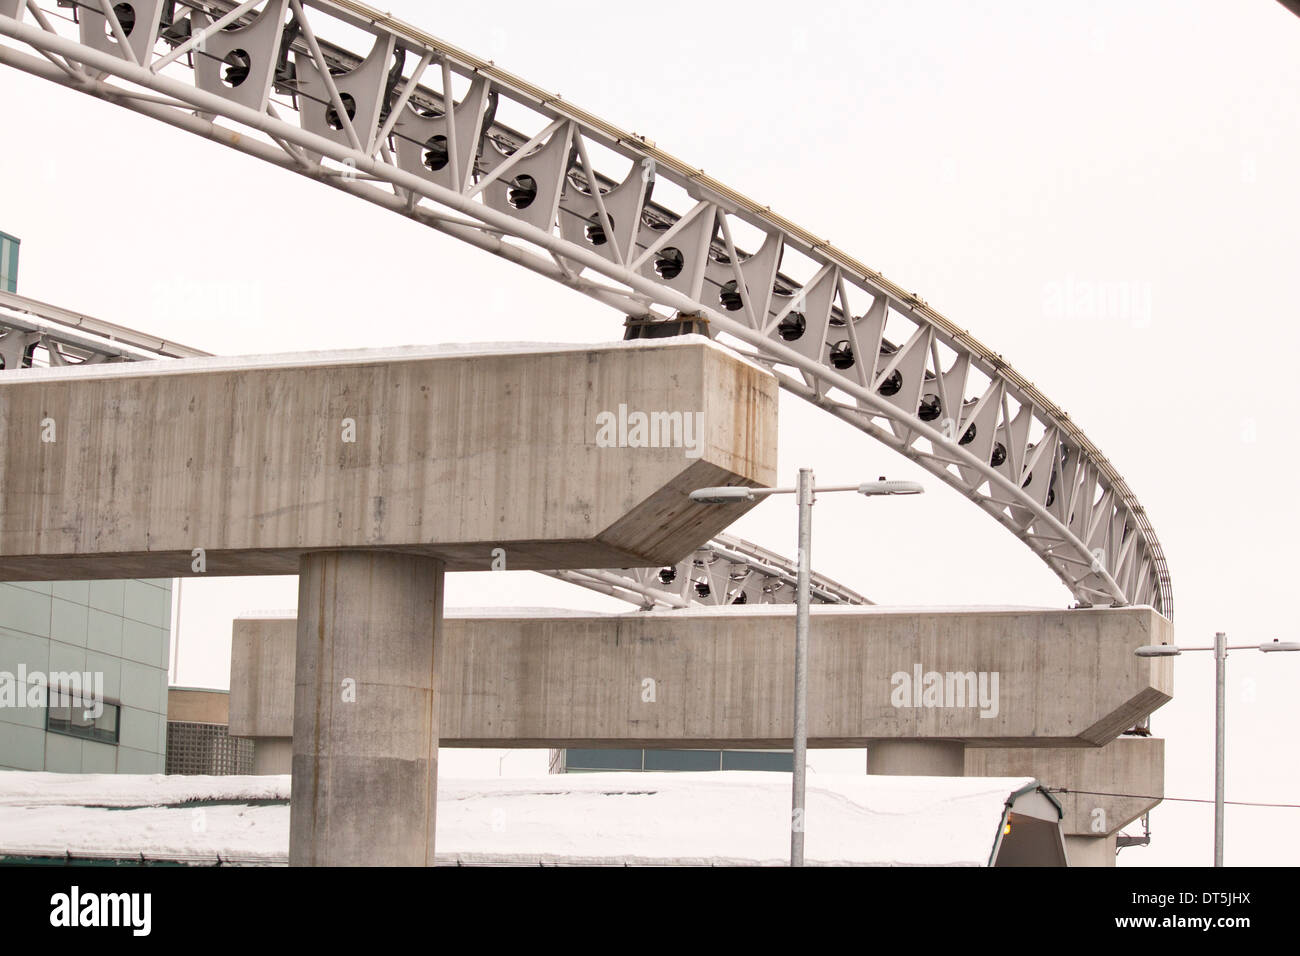 Raised track for the Link shuttle train at Pearson International Airport in Toronto Ontario Canada Stock Photo